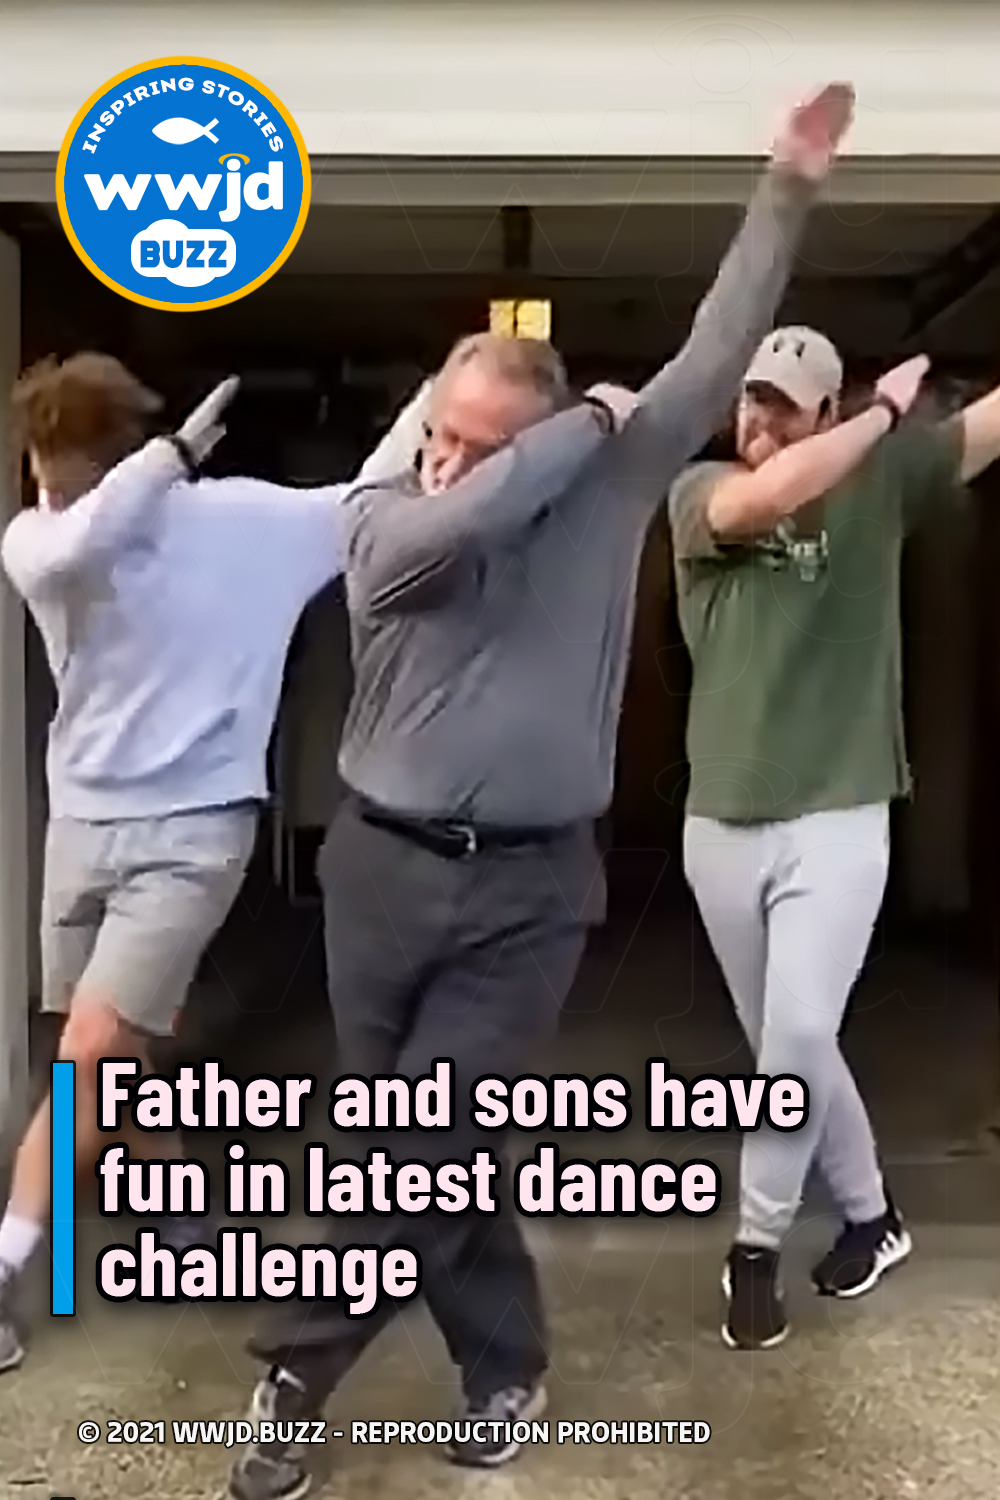 Father and sons have fun in latest dance challenge